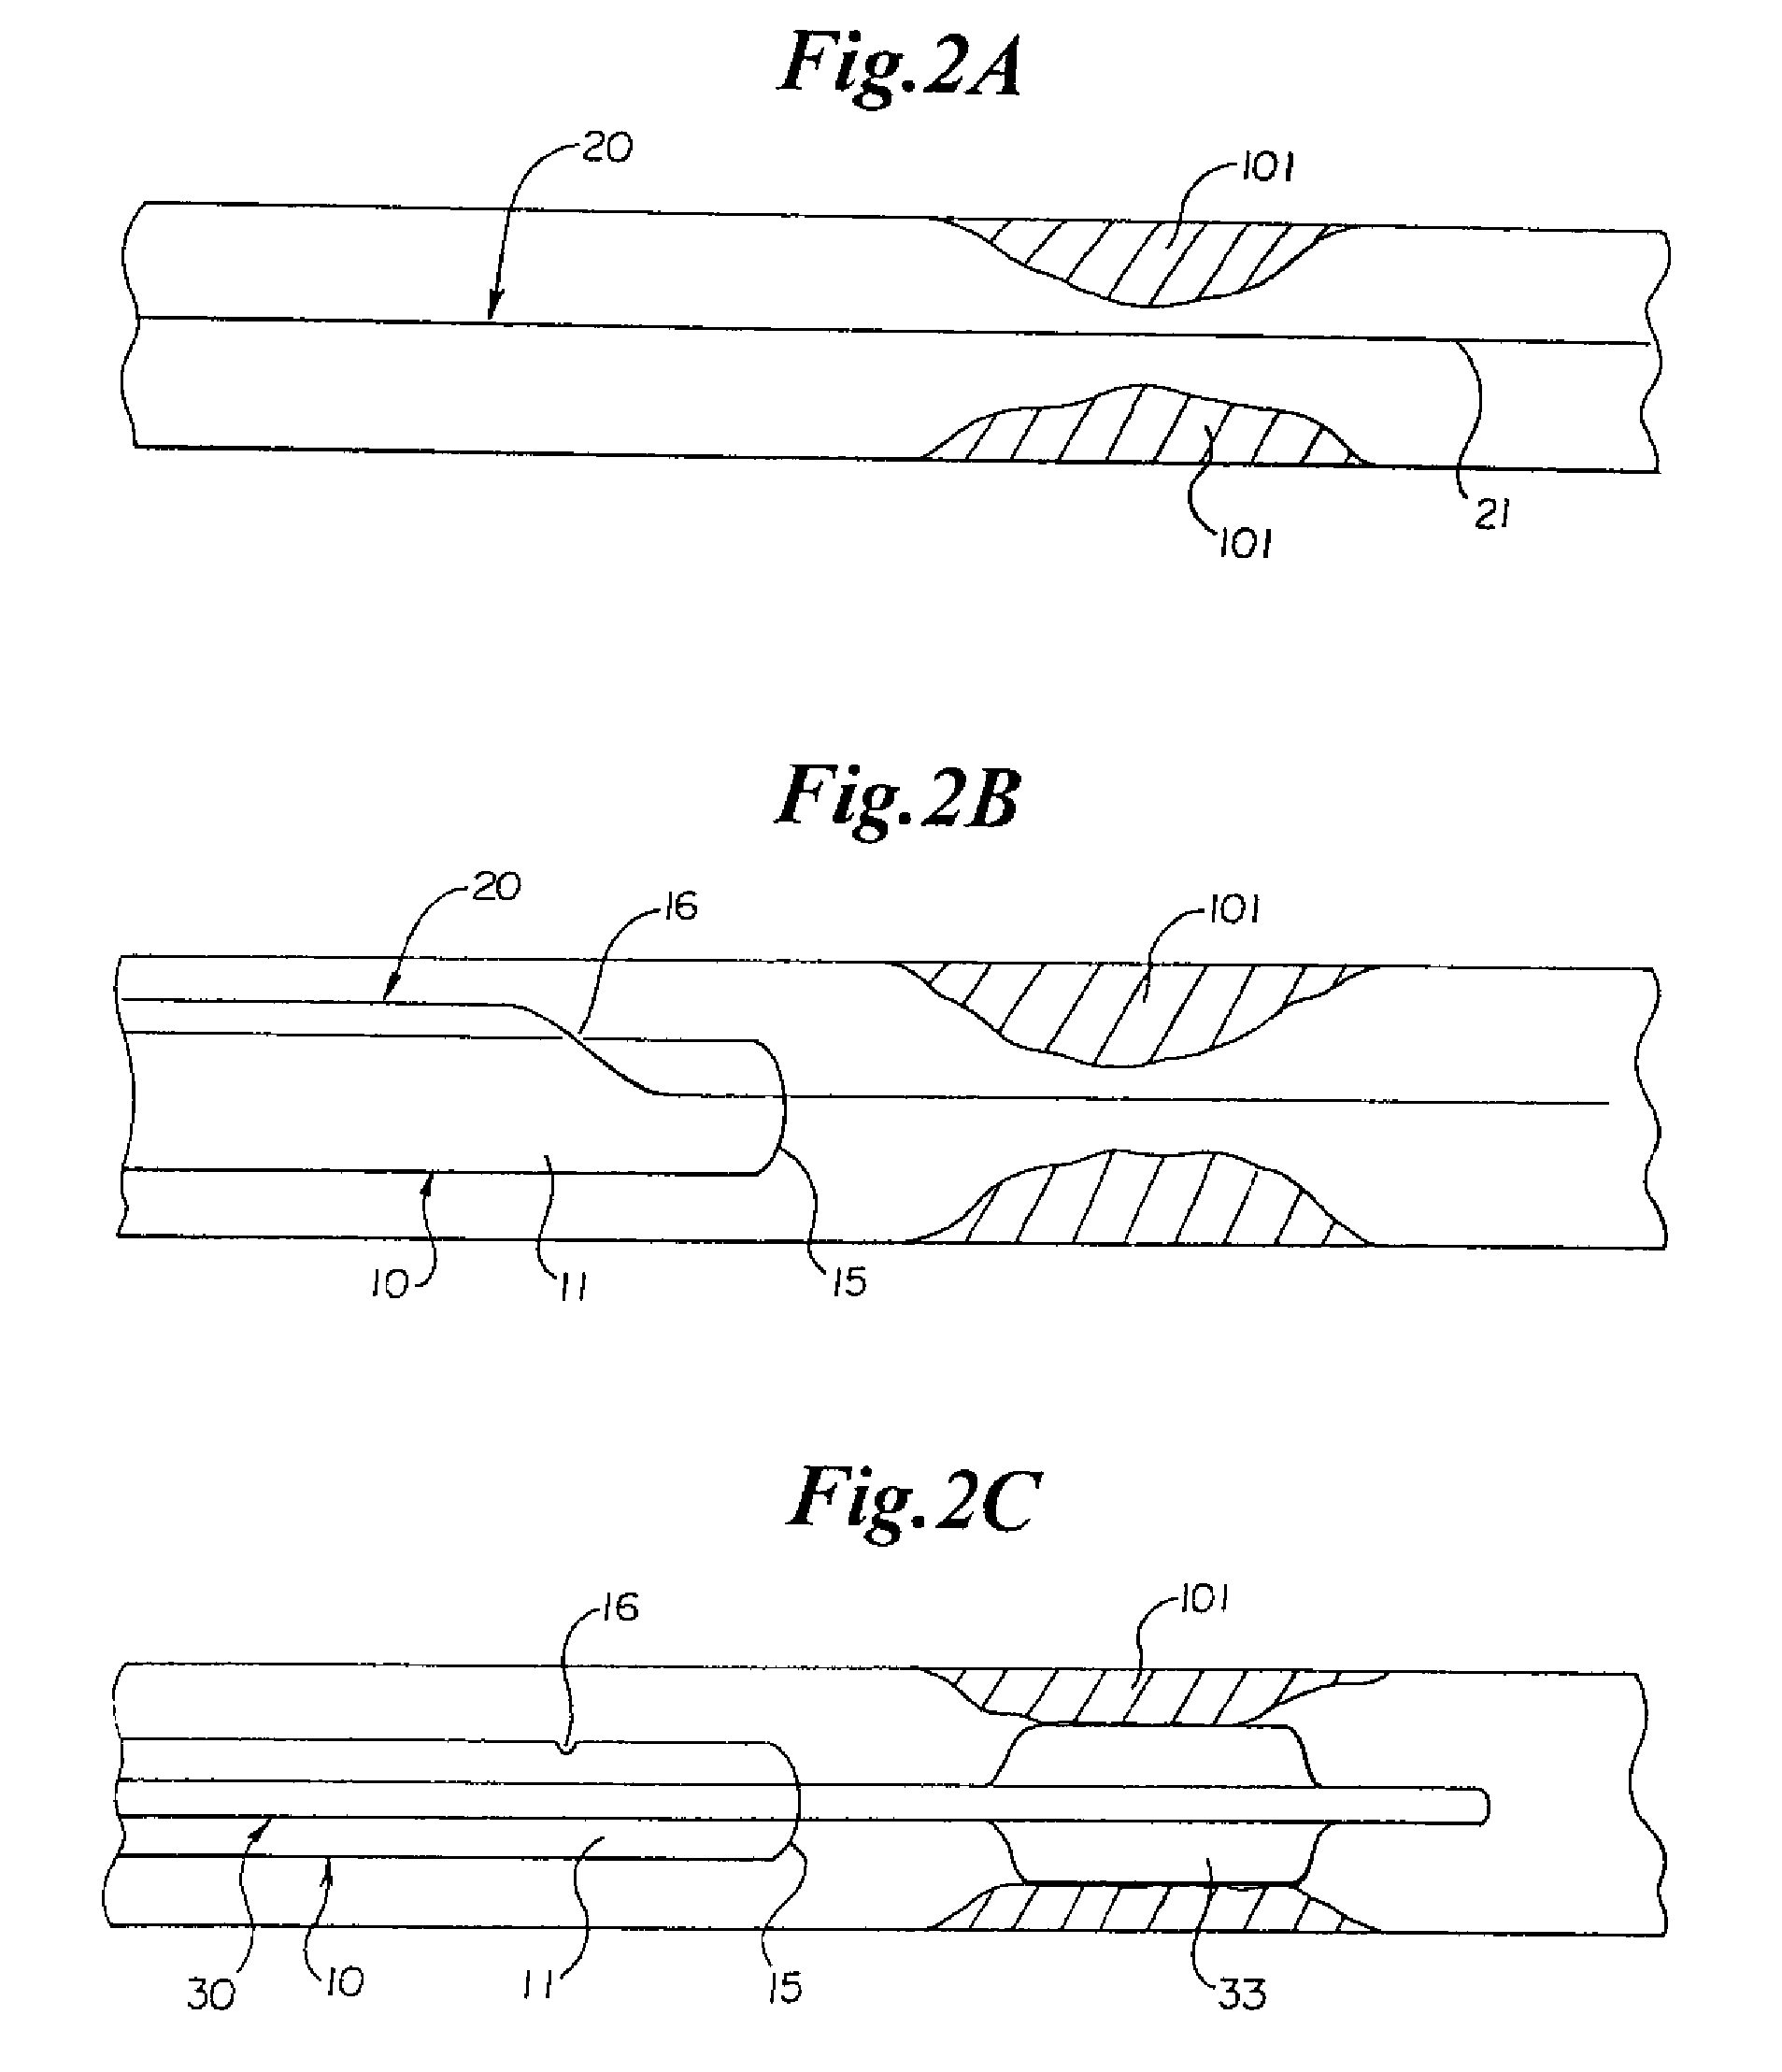 Rapid exchange sheath for deployment of medical devices and methods of use